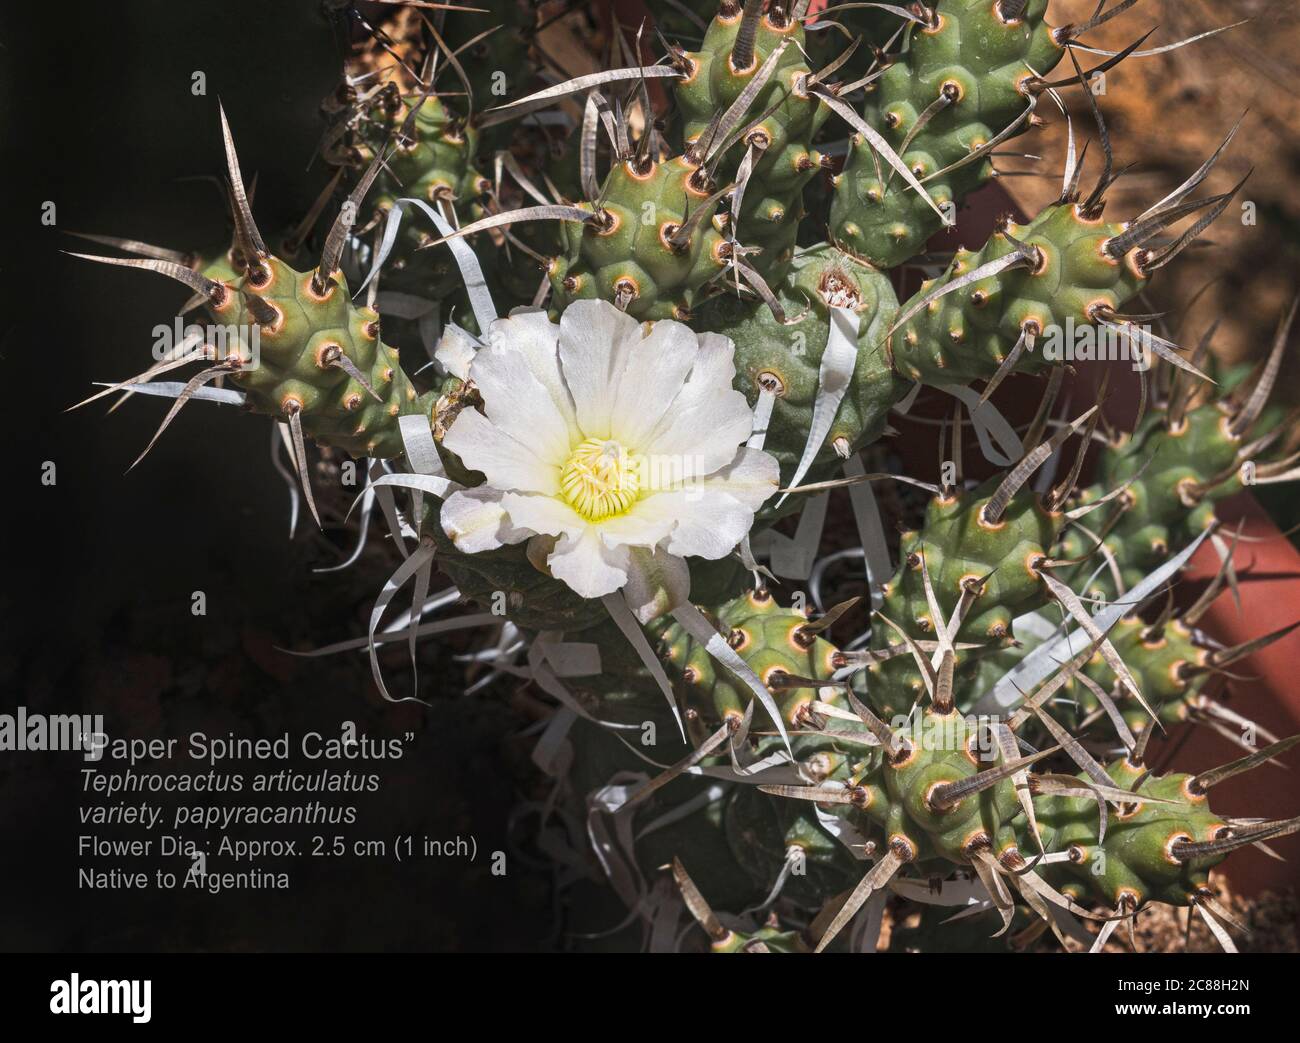 labeled specimen of a paper spine cholla cactus plant with a single white flower surrounded by papery spines and branching segments Stock Photo